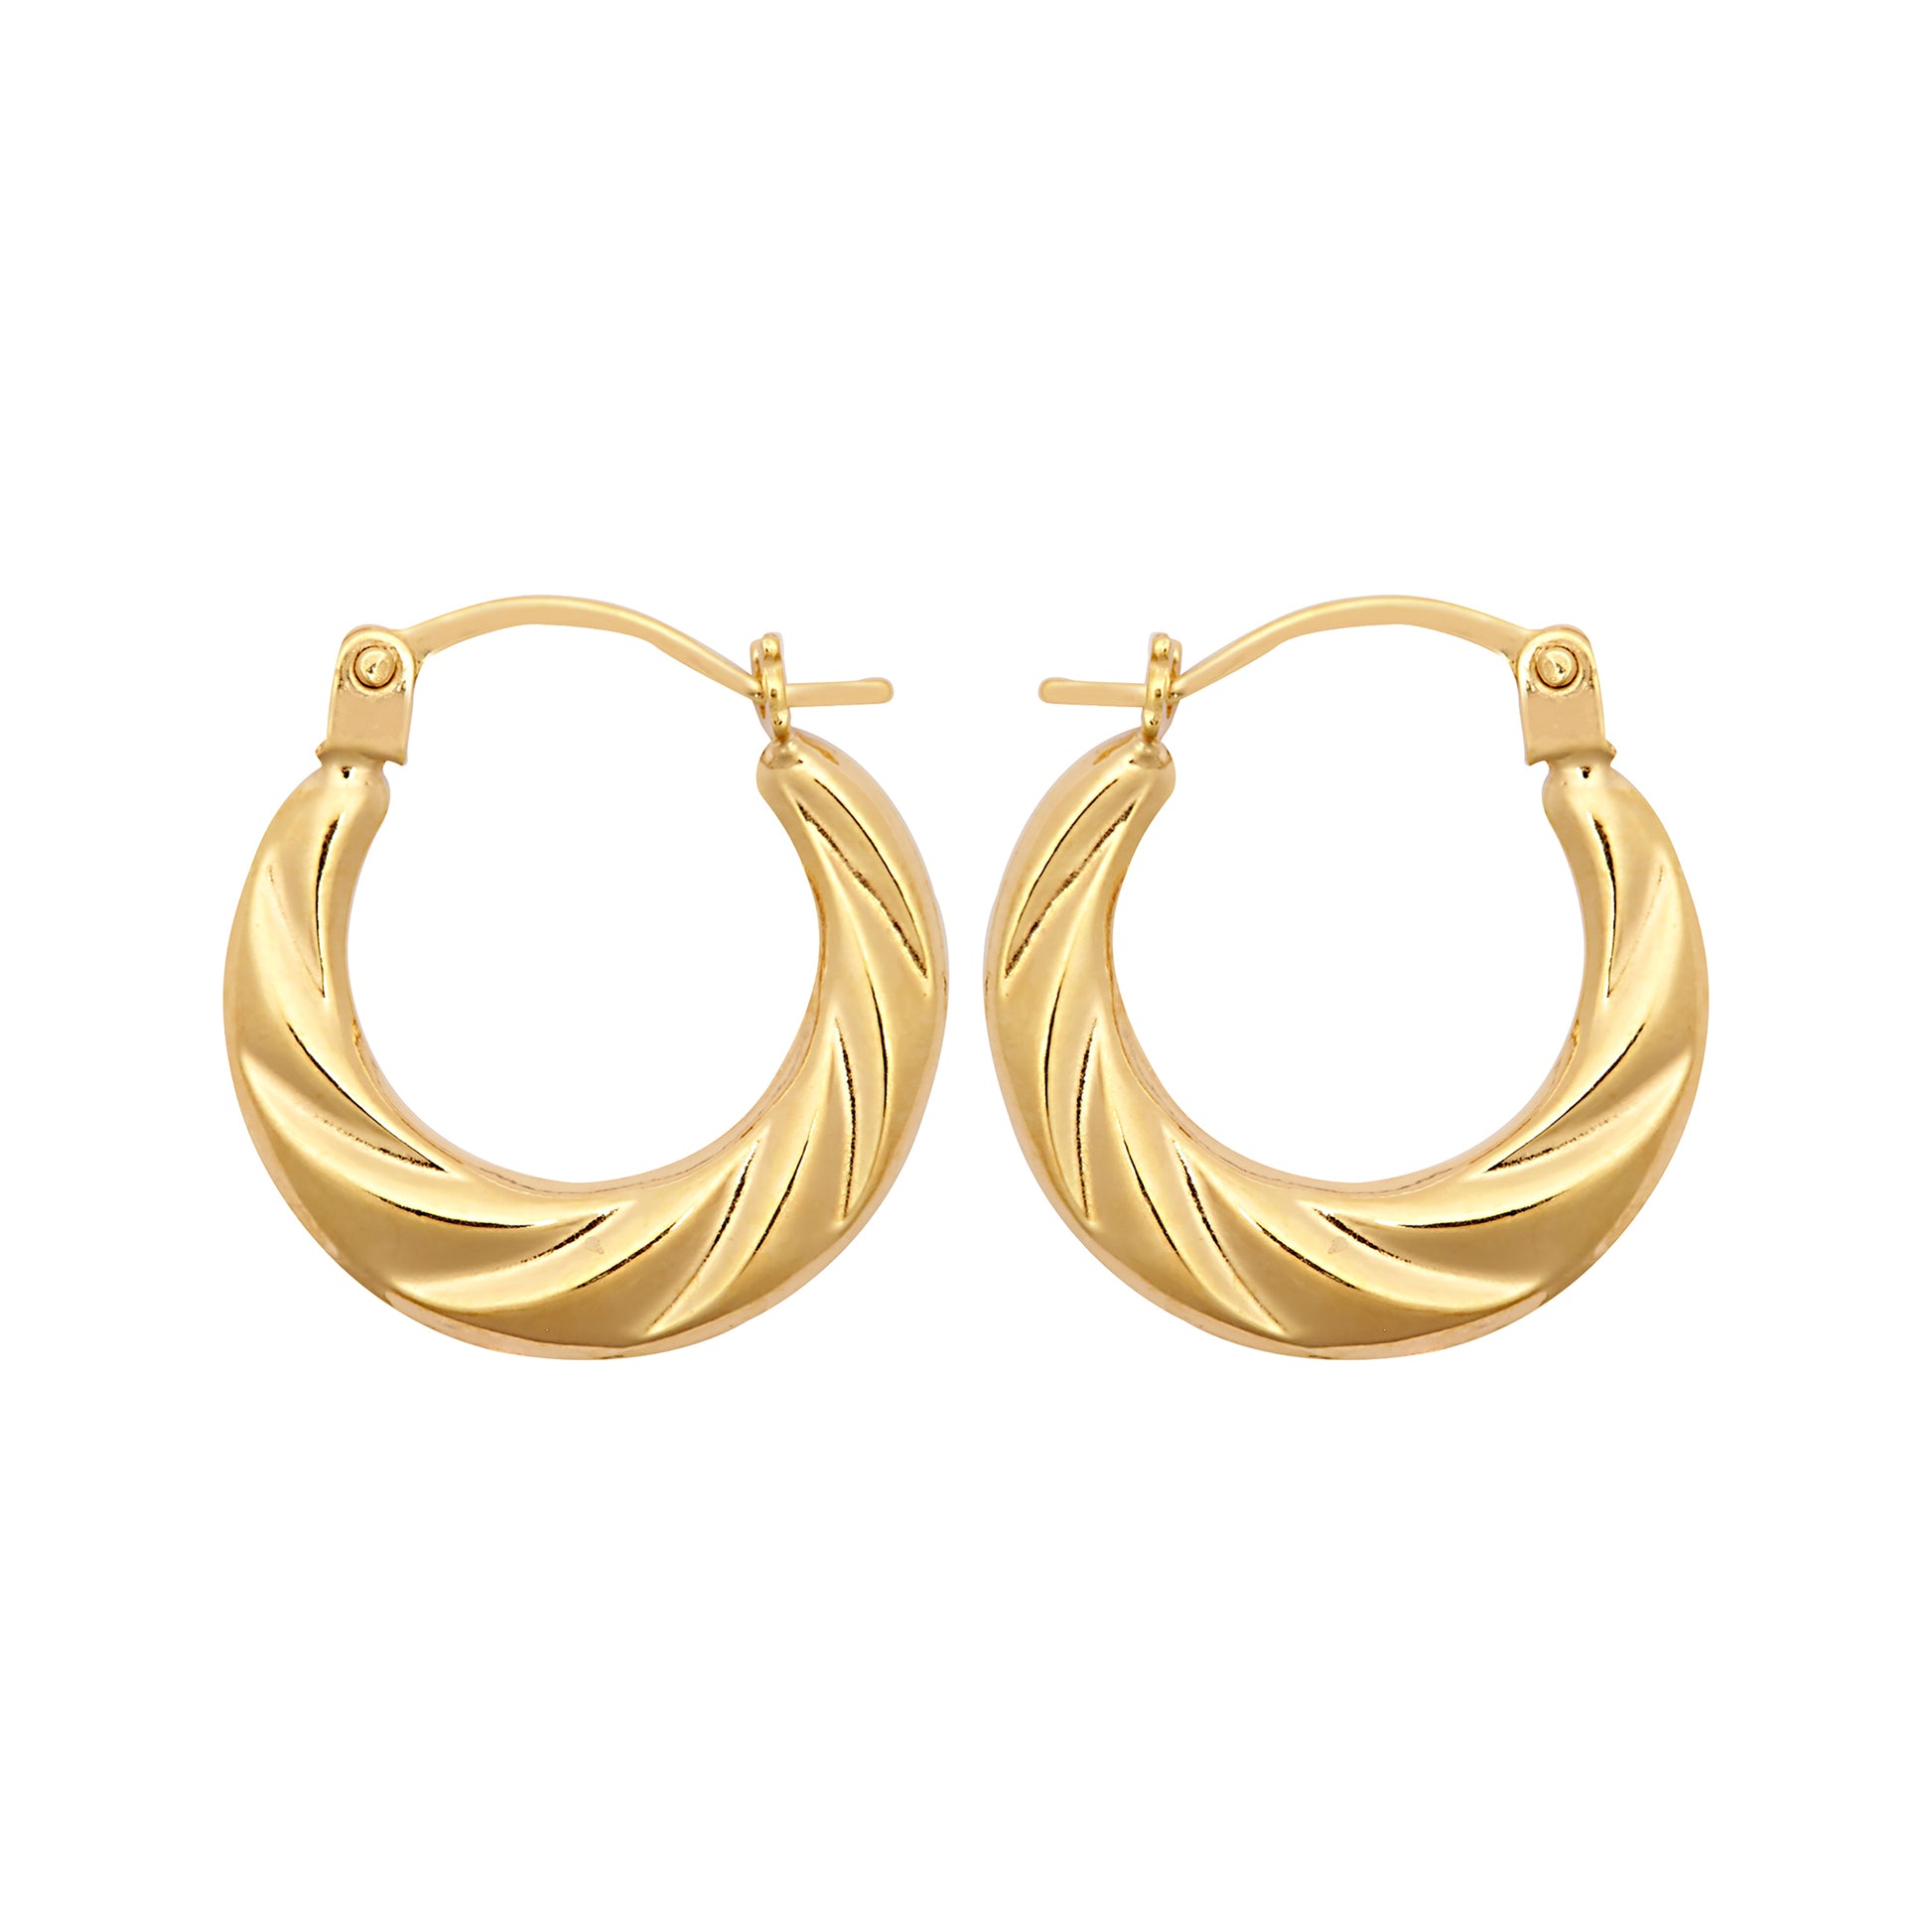 Ladies 9ct Gold  Twisted Croissant Crescent Moon Creole Earrings - JER795